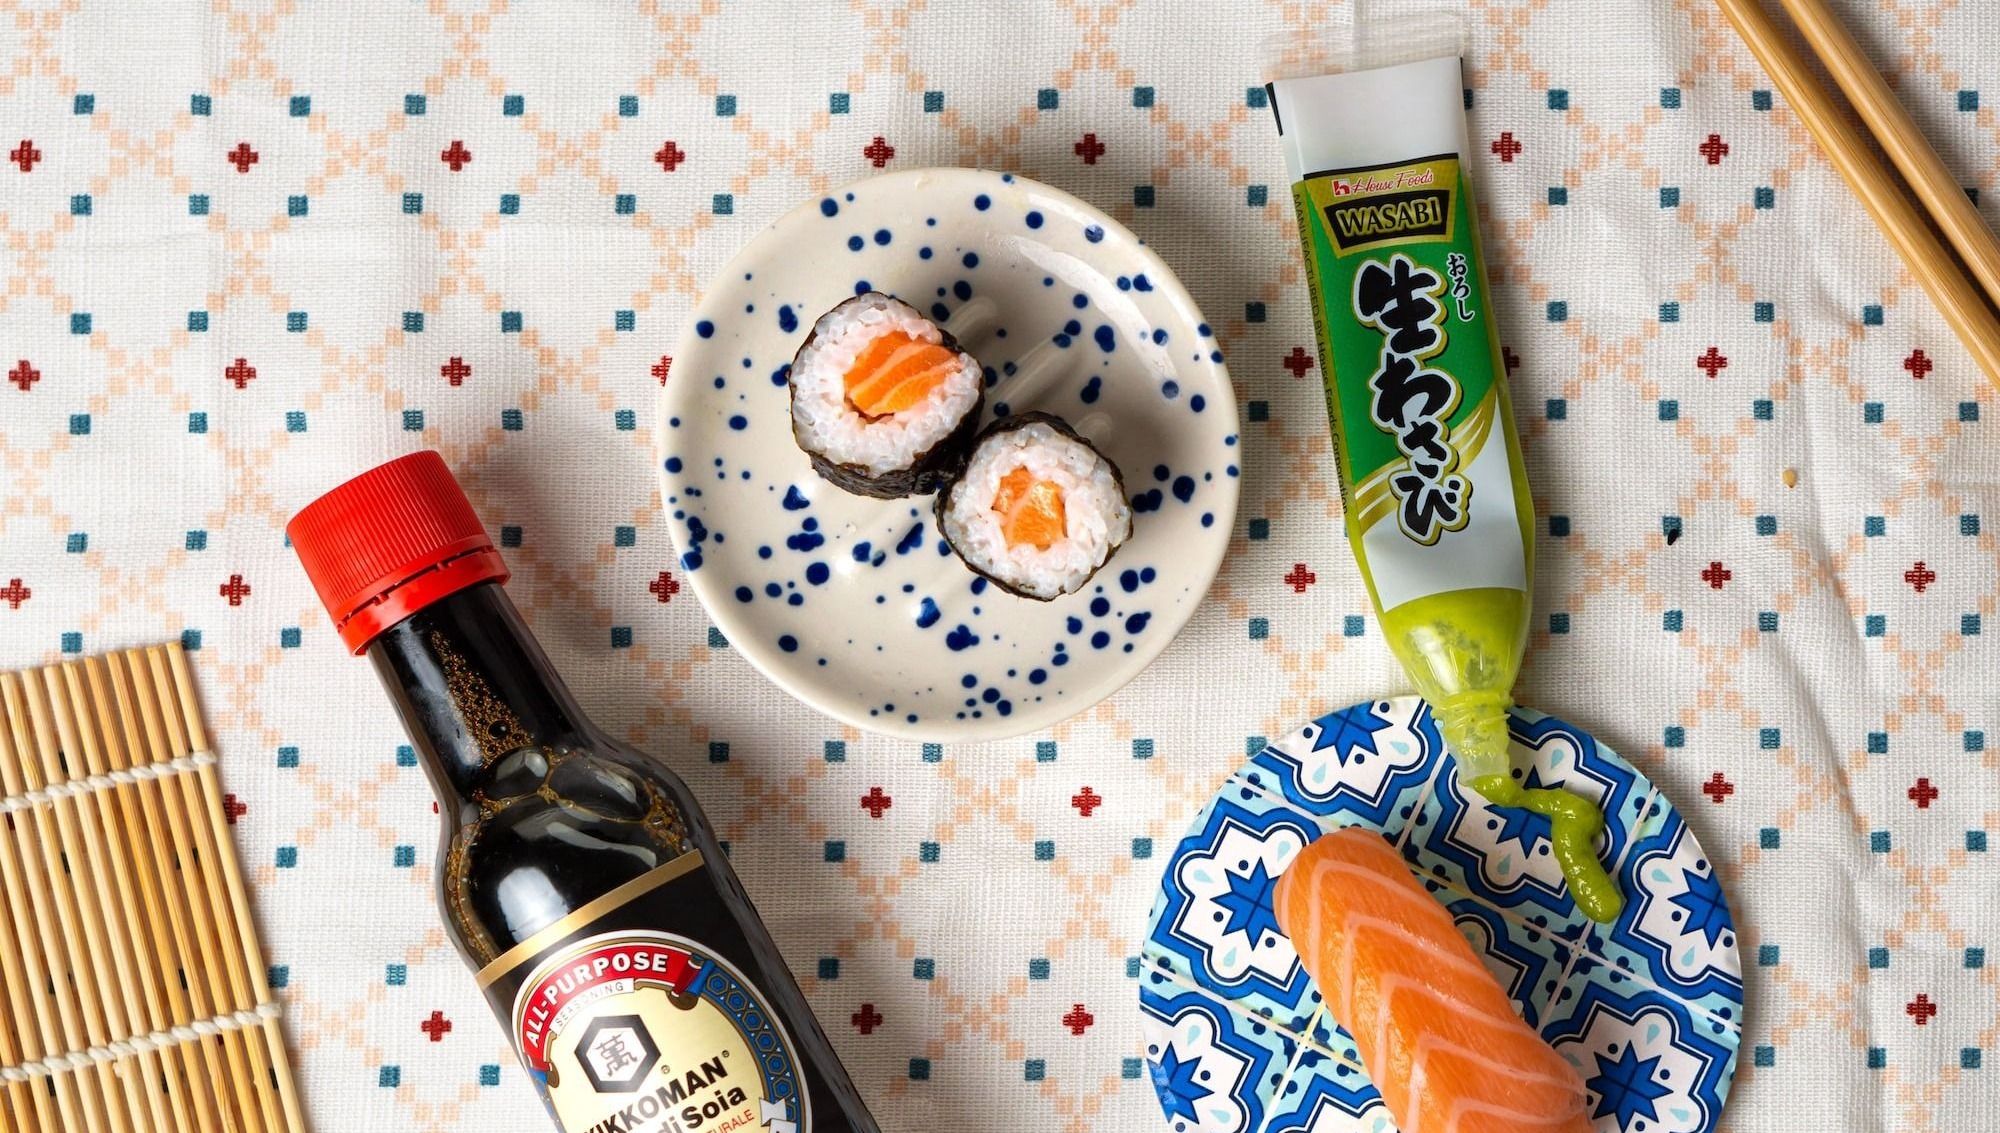 a table topped with a plate of sushi and a bottle of sauce